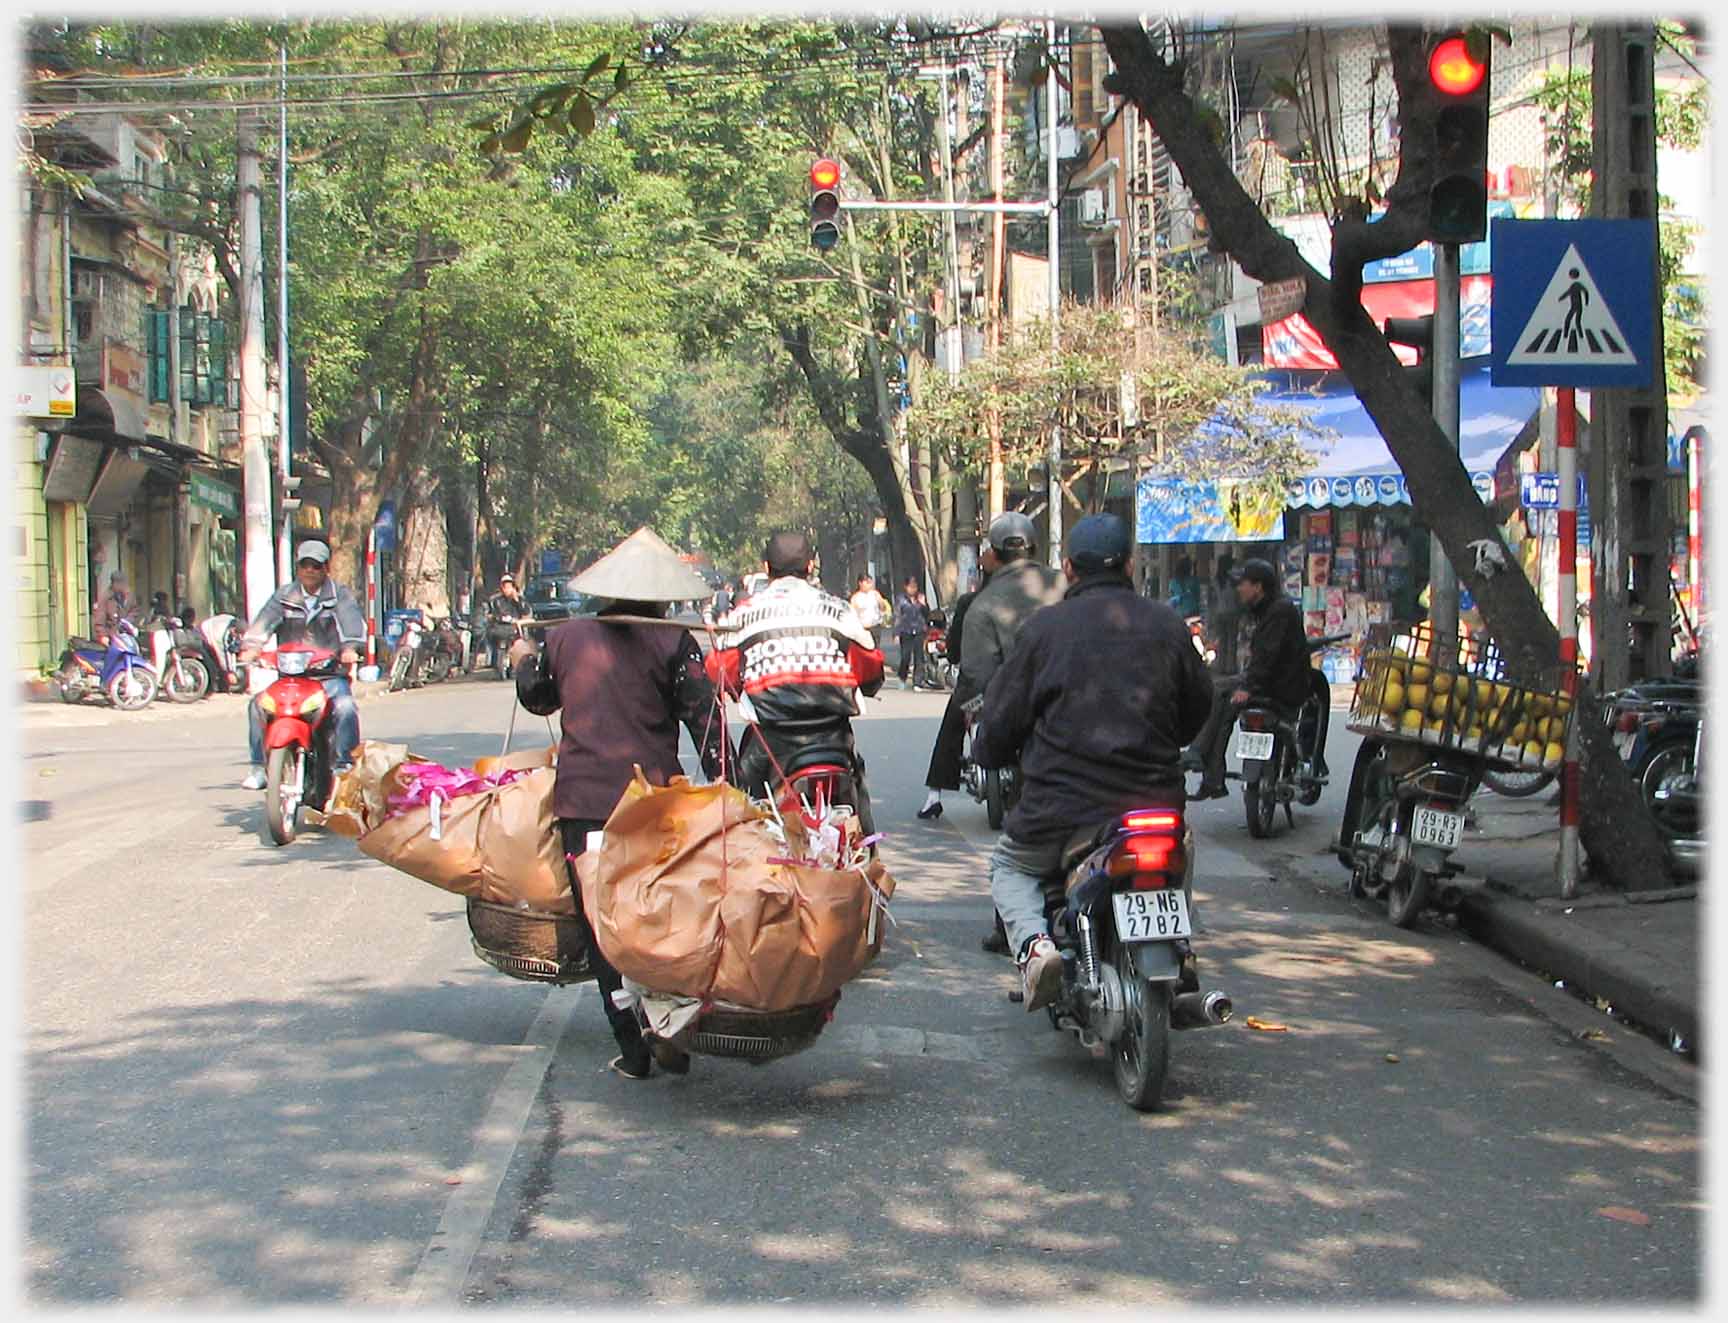 Panniers with large sacks of rubbish.